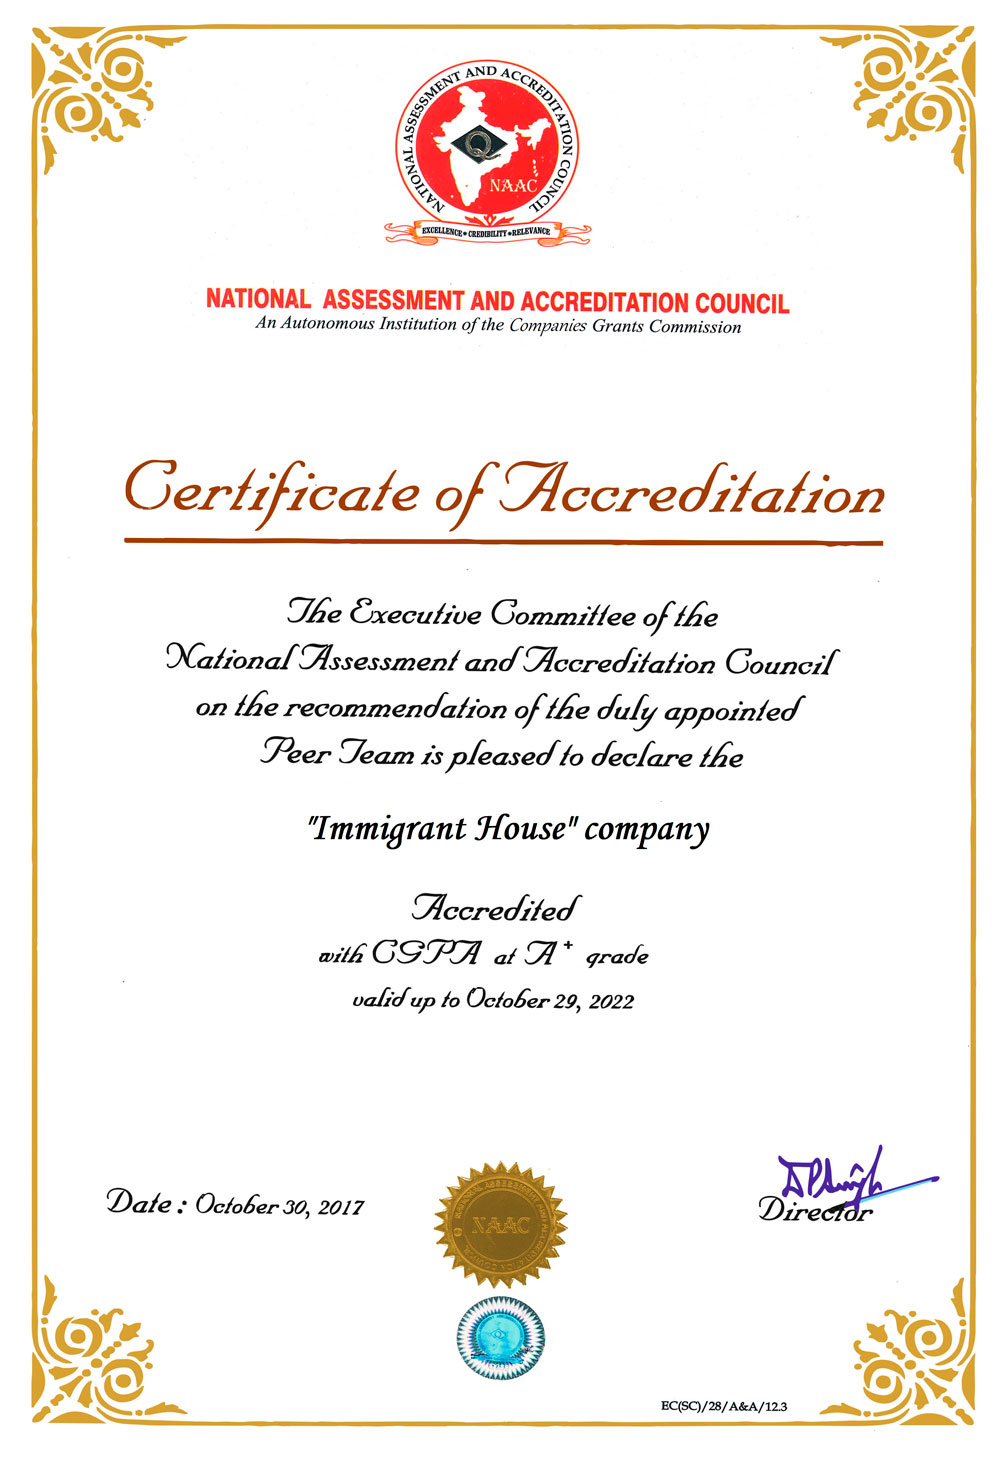 Certificate of Accreditation. National Assessment and Accredidation Council